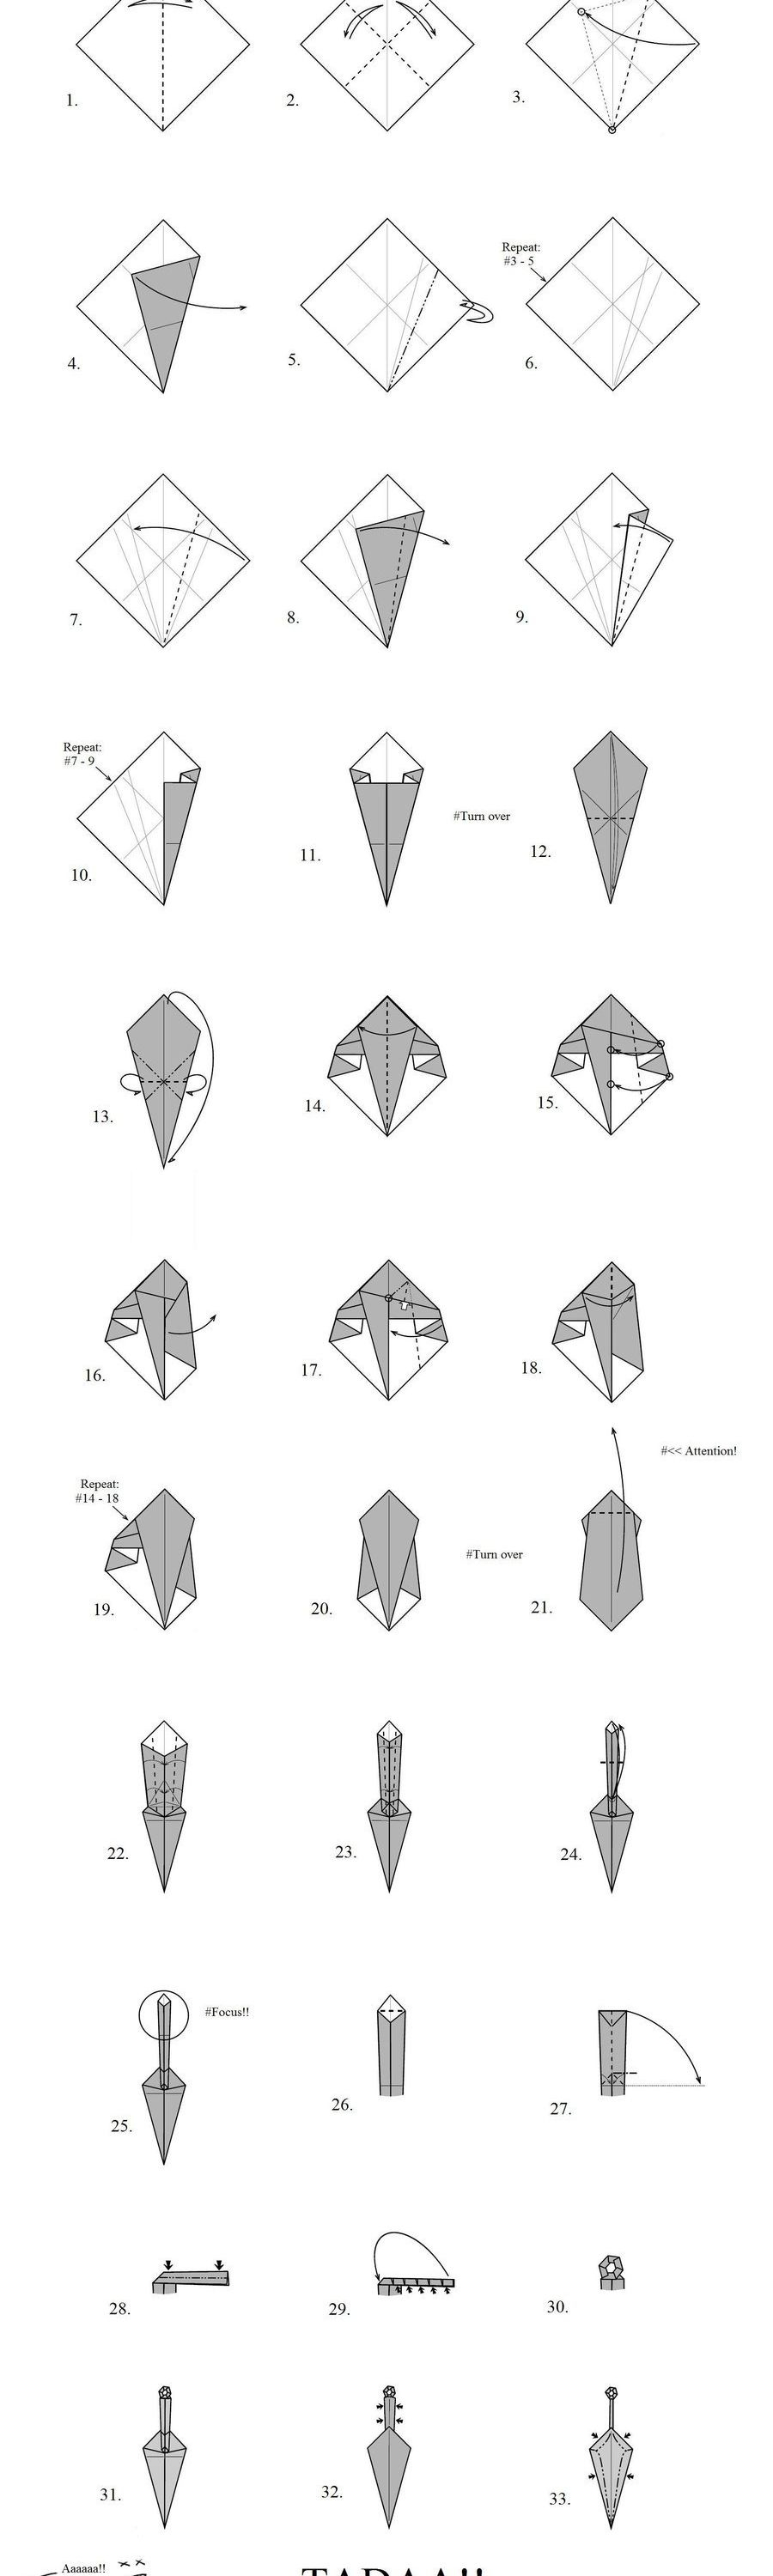 Origami Ornaments Instructions Origami Instructions Elegant How To Make An Origami Vader Star Wars